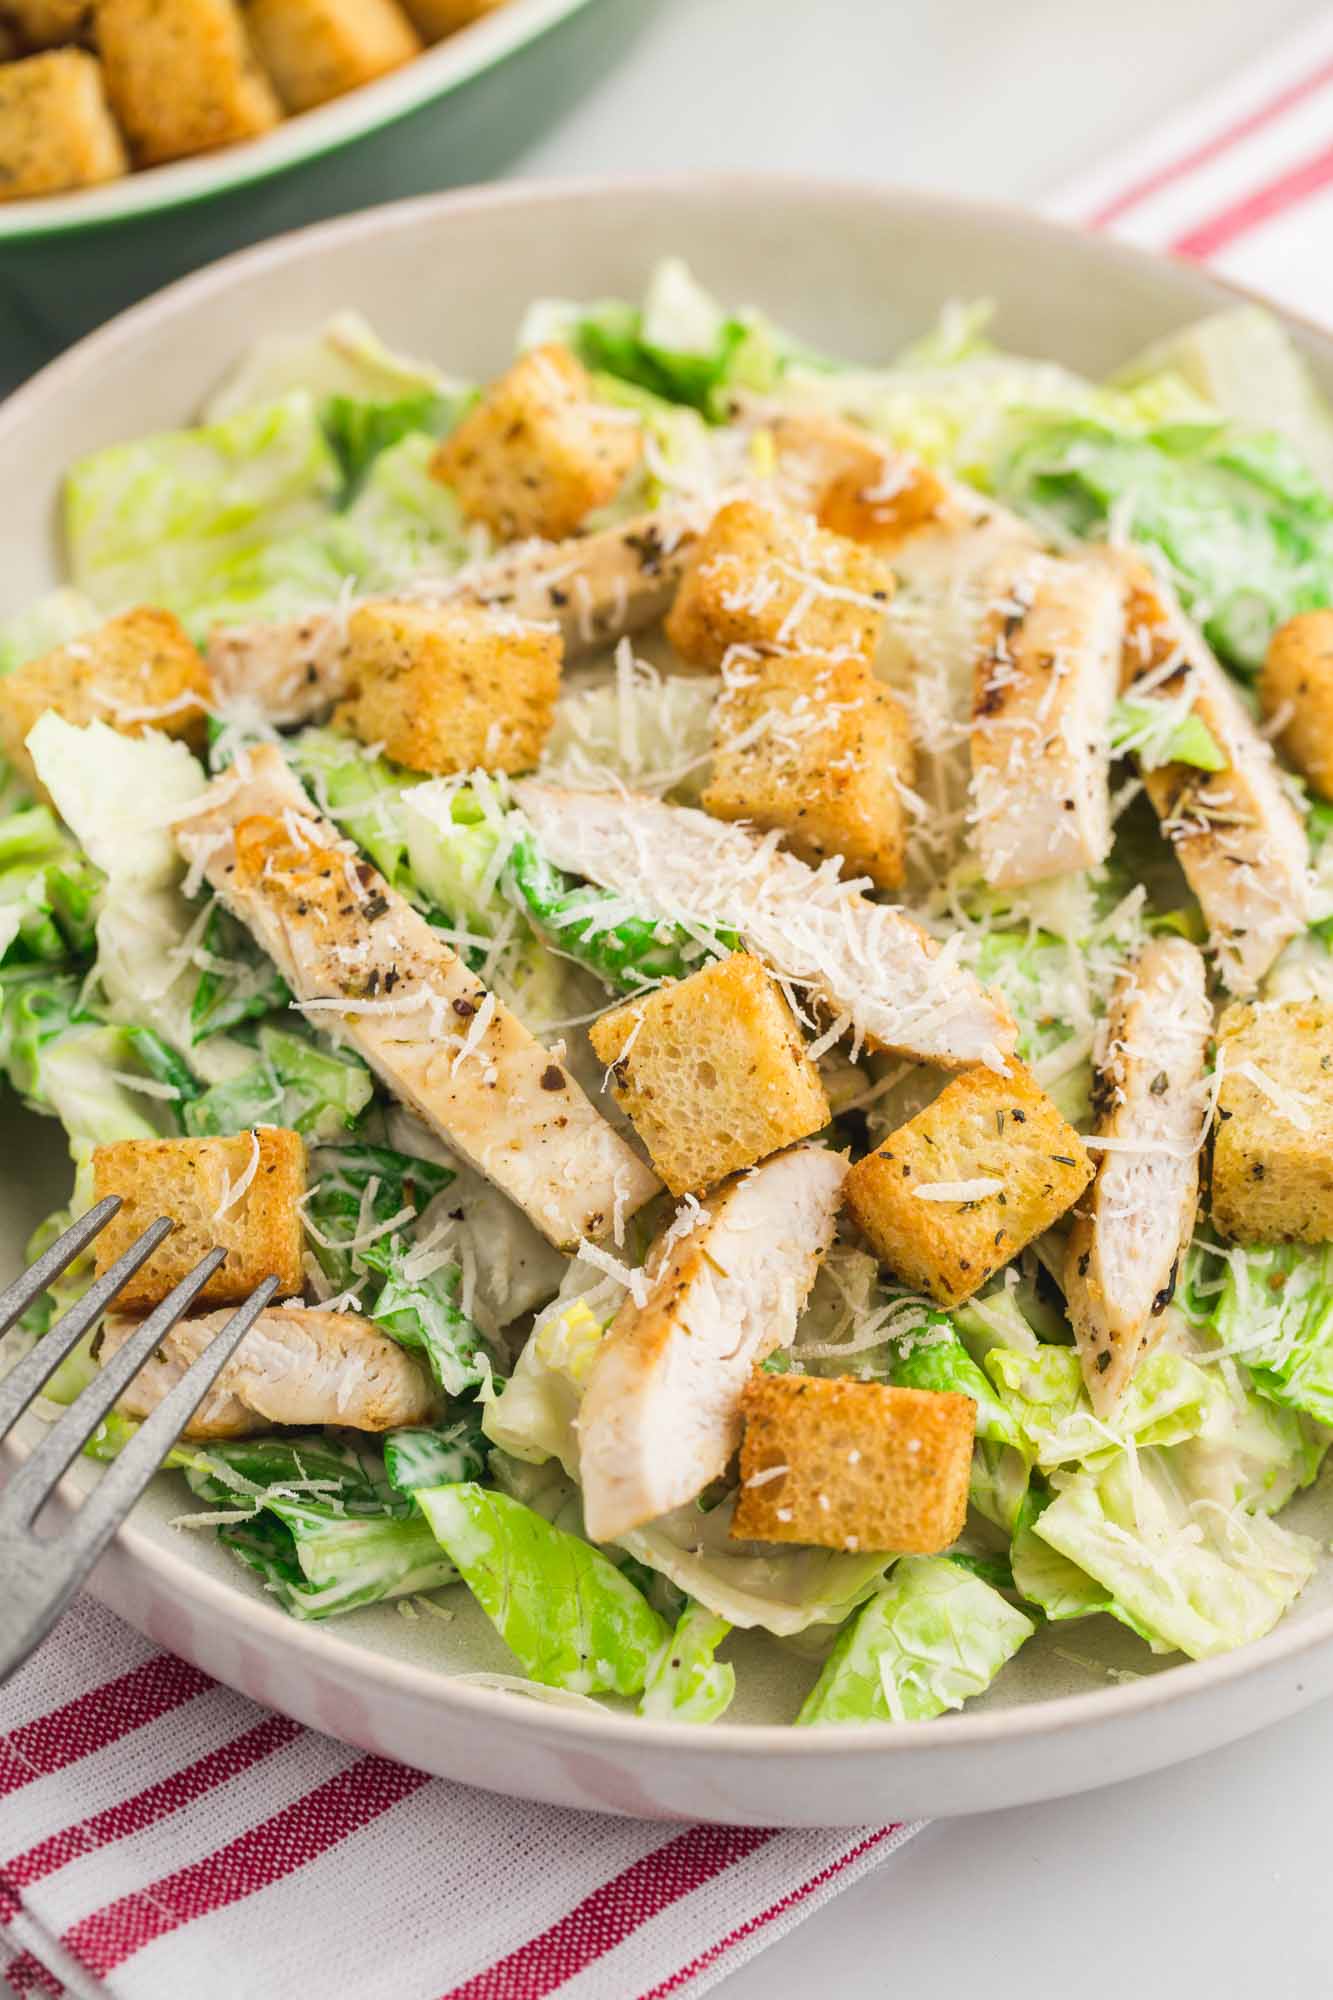 Caesar salad with chicken and air fryer croutons